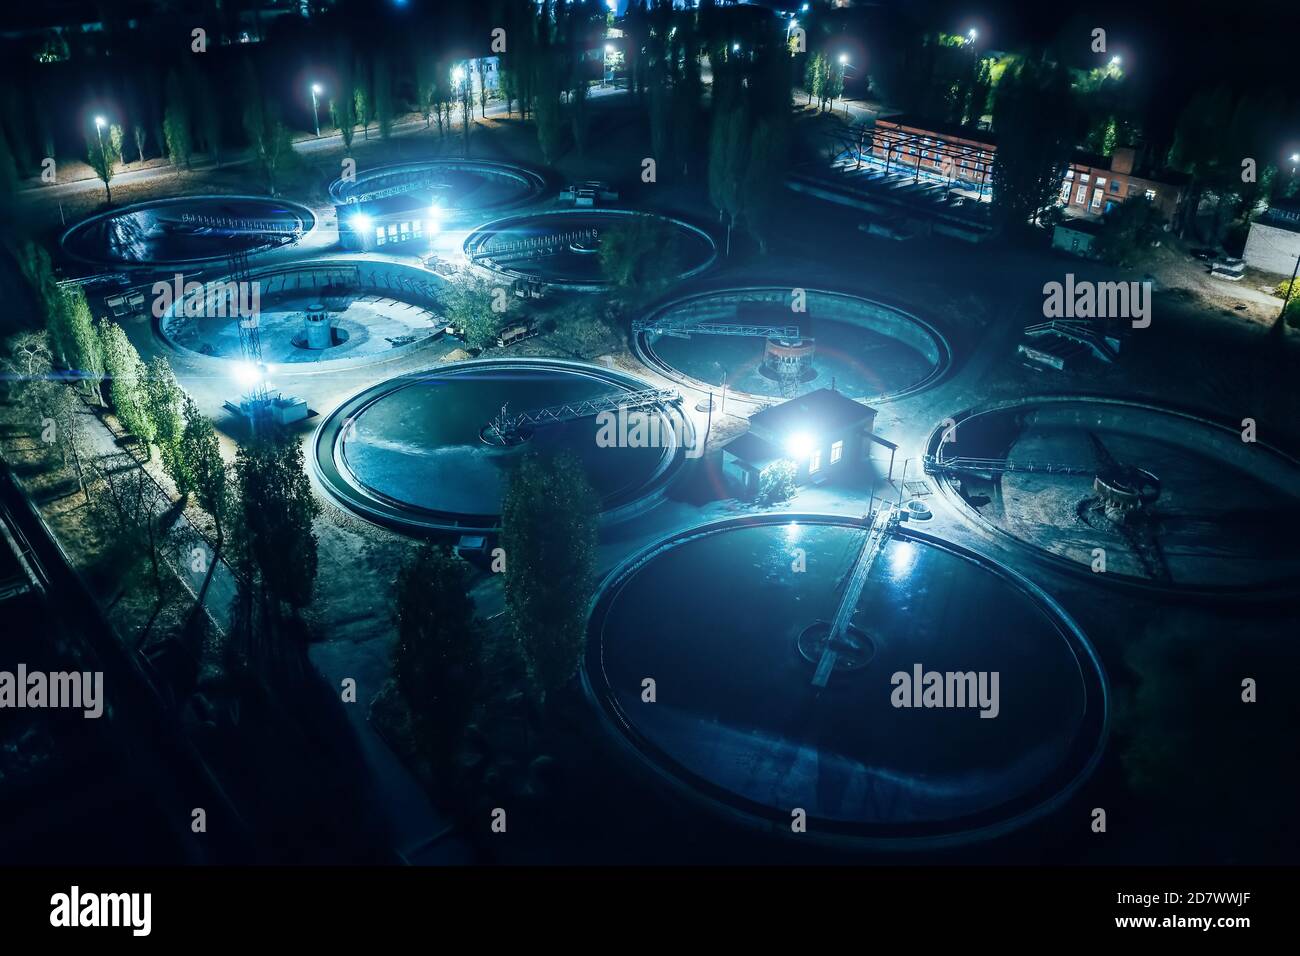 Wastewater treatment plant at night, aerial view. Reservoir for purification of sewage. Stock Photo